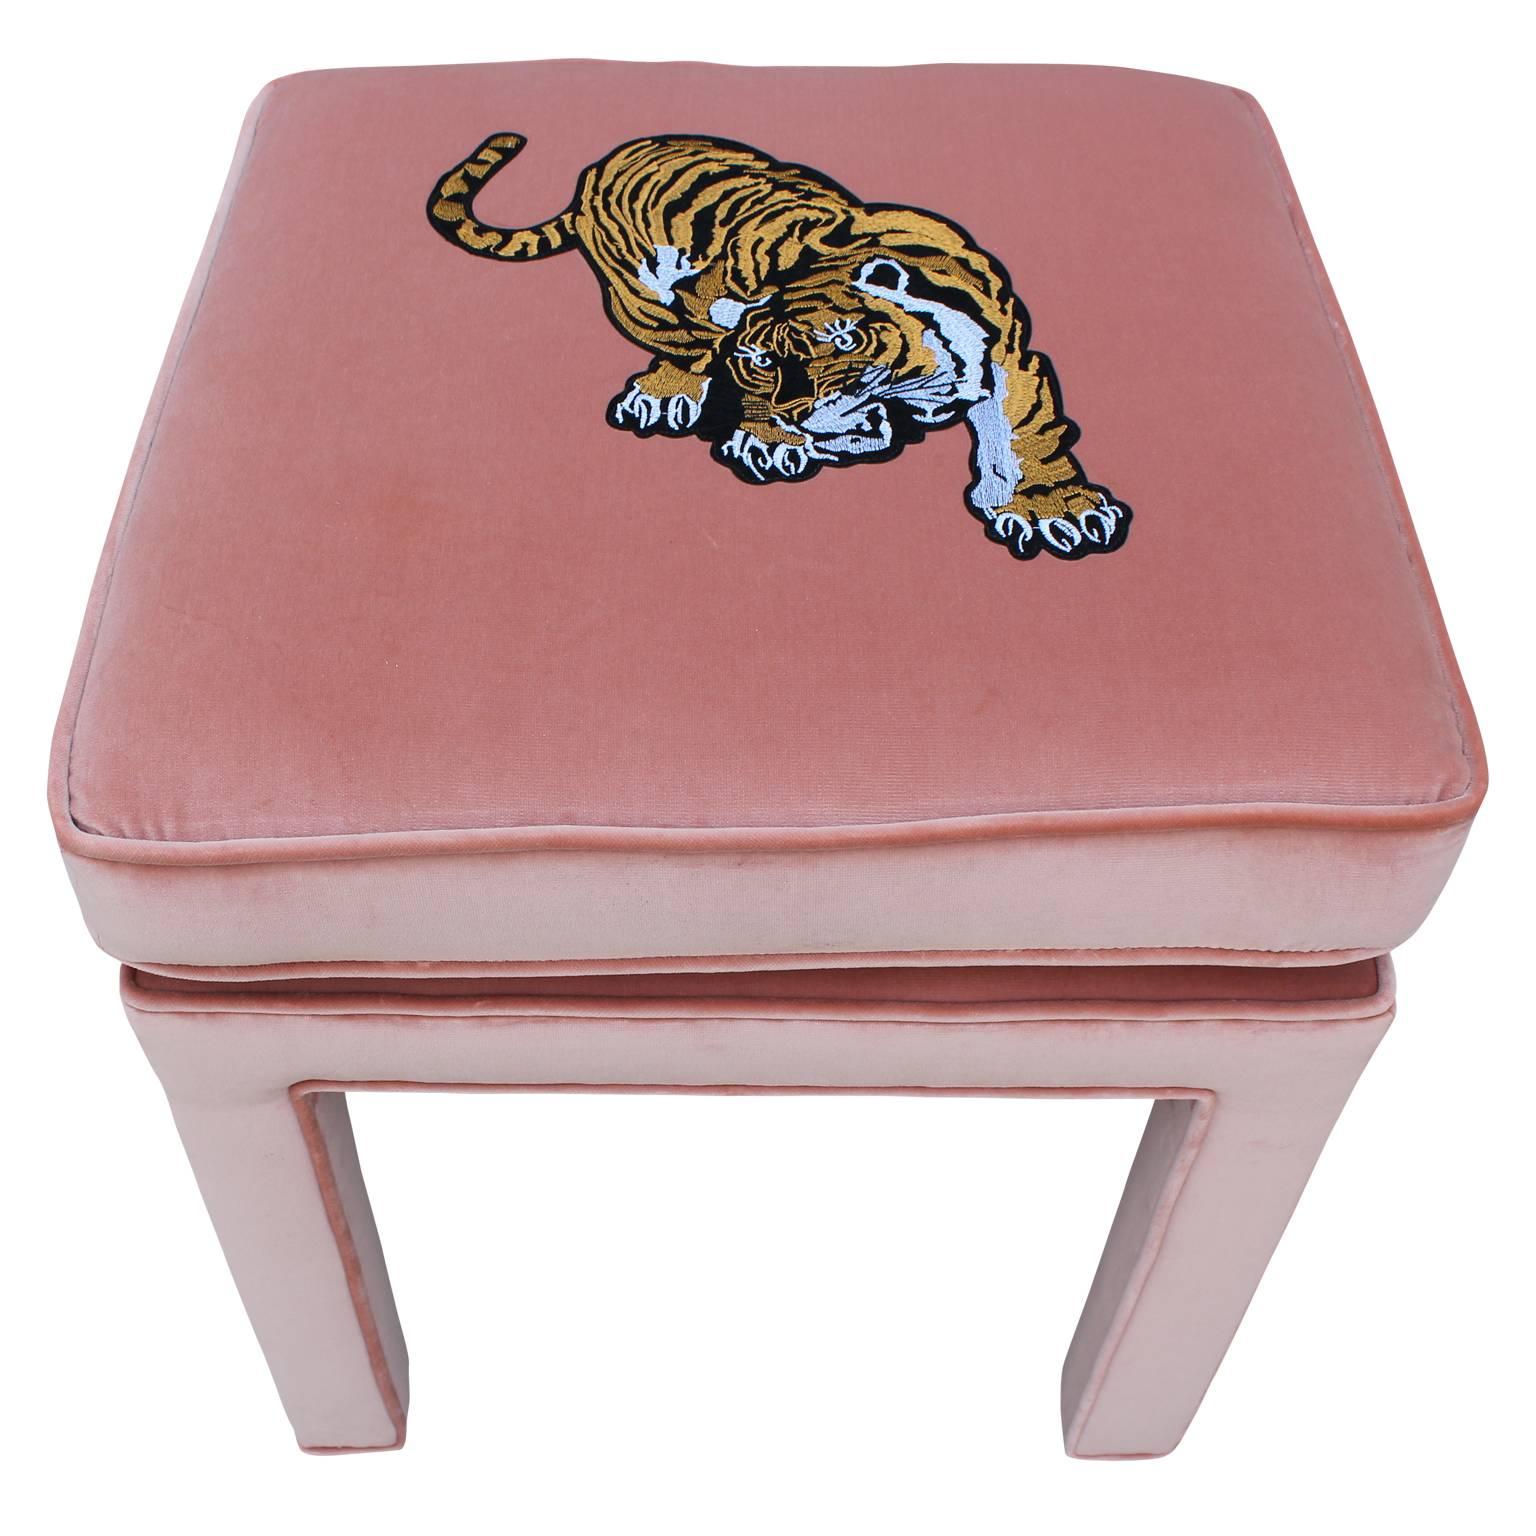 Luxe modern pair of custom-made light pink velvet ottomans or stools with detailed Chinese tiger embroidery. Style from Parsons School of Art and Design or Milo Baughman. We can custom make these for you in any dimensions or fabric. Custom